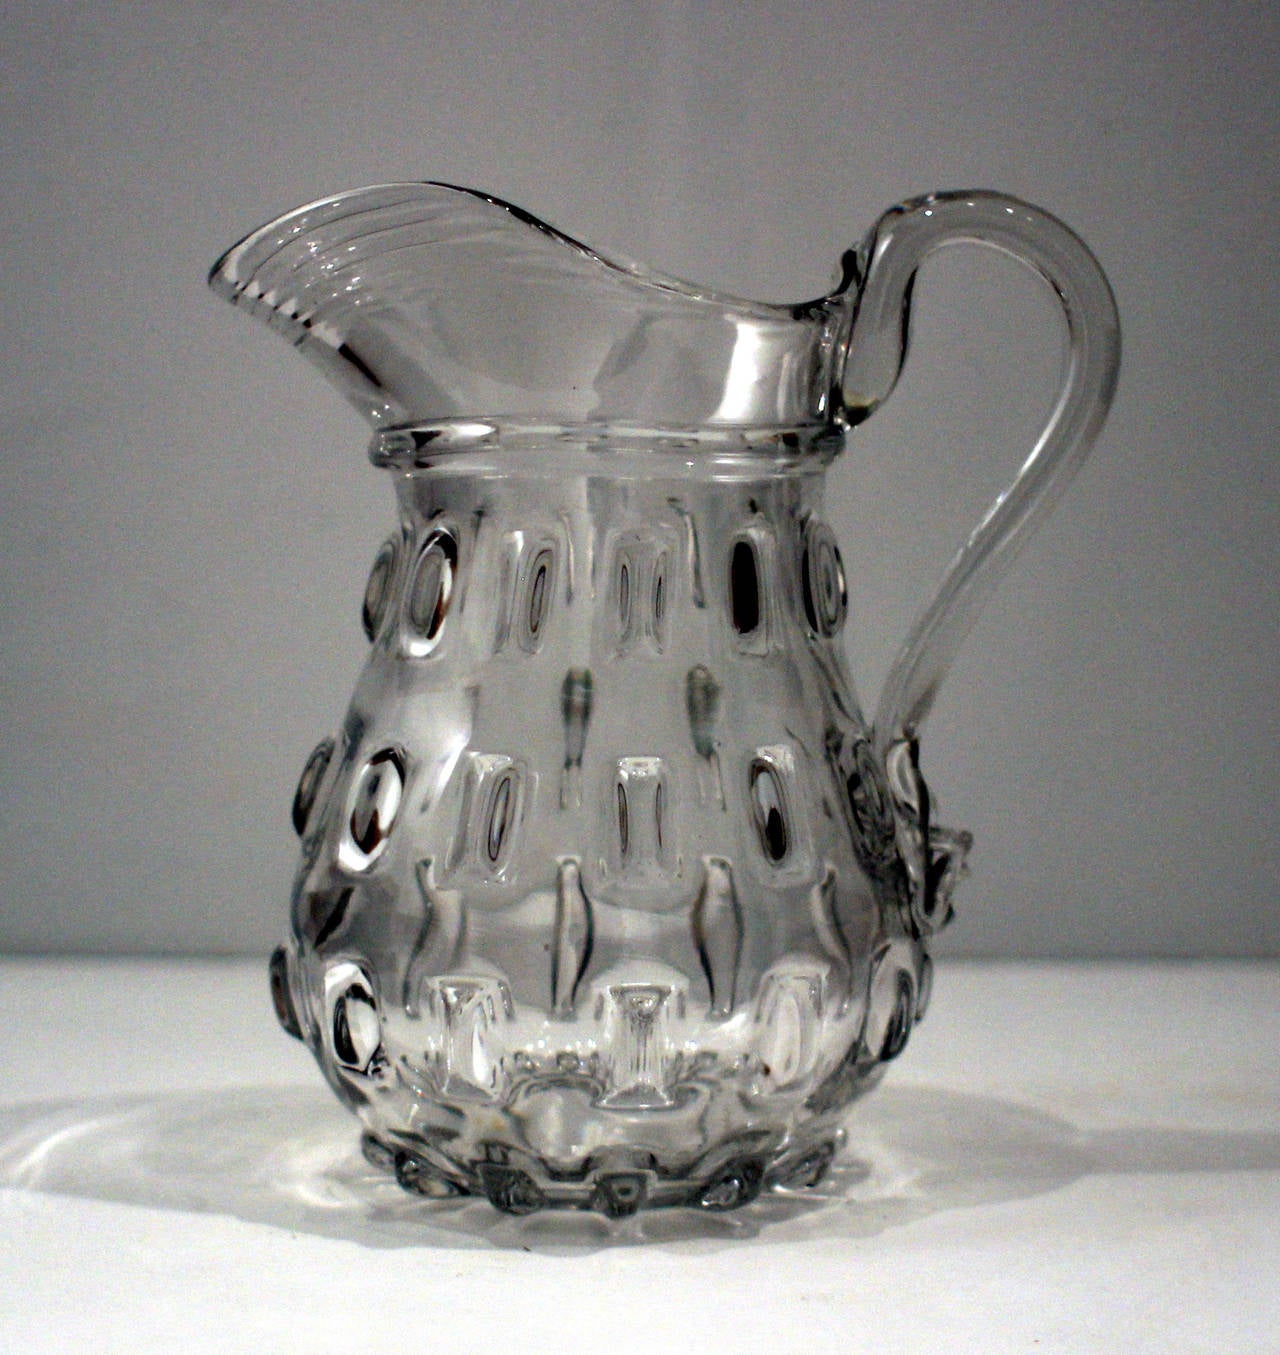 Handsome handblown glass pitcher in the cleat pattern, with applied handle and rippled rim; probably Pittsburgh, circa 1850. Fine and heavy example.